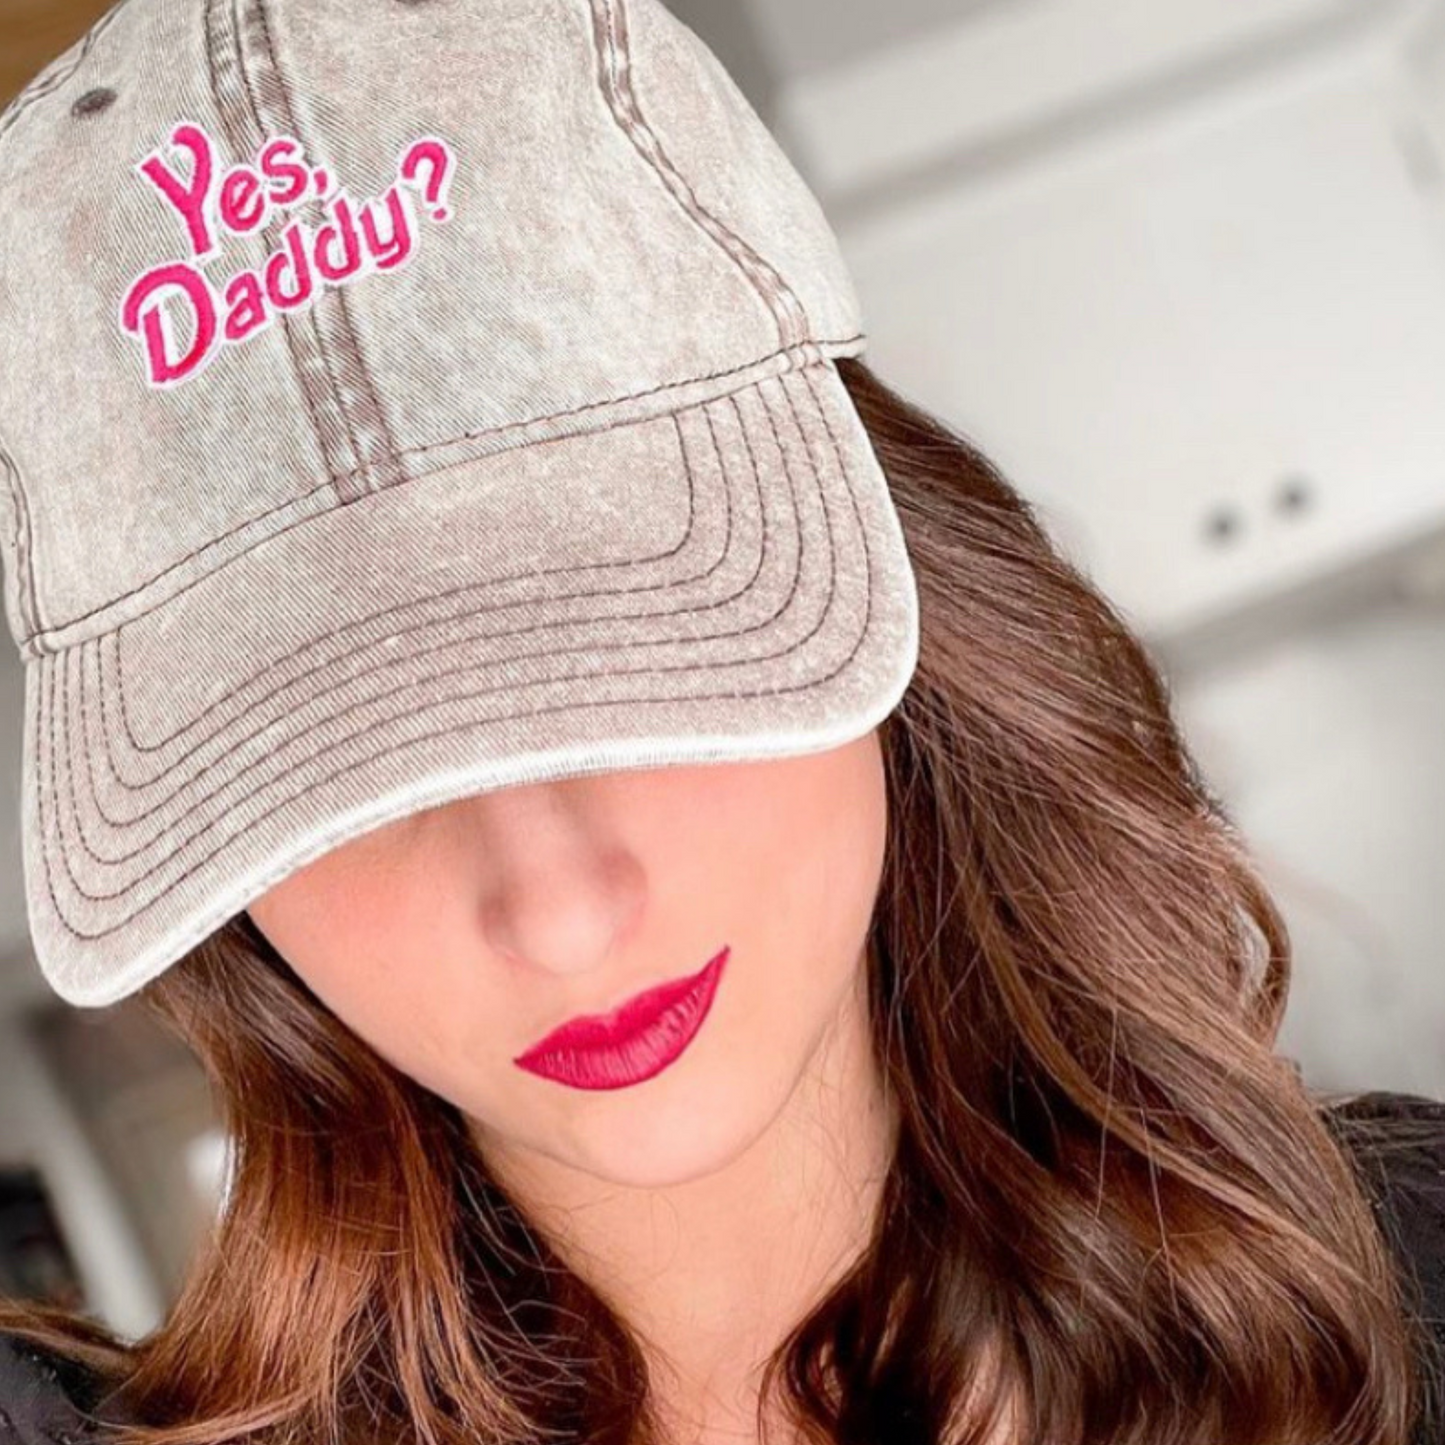 Yes, daddy vintage hat for a dark romance book trope lover